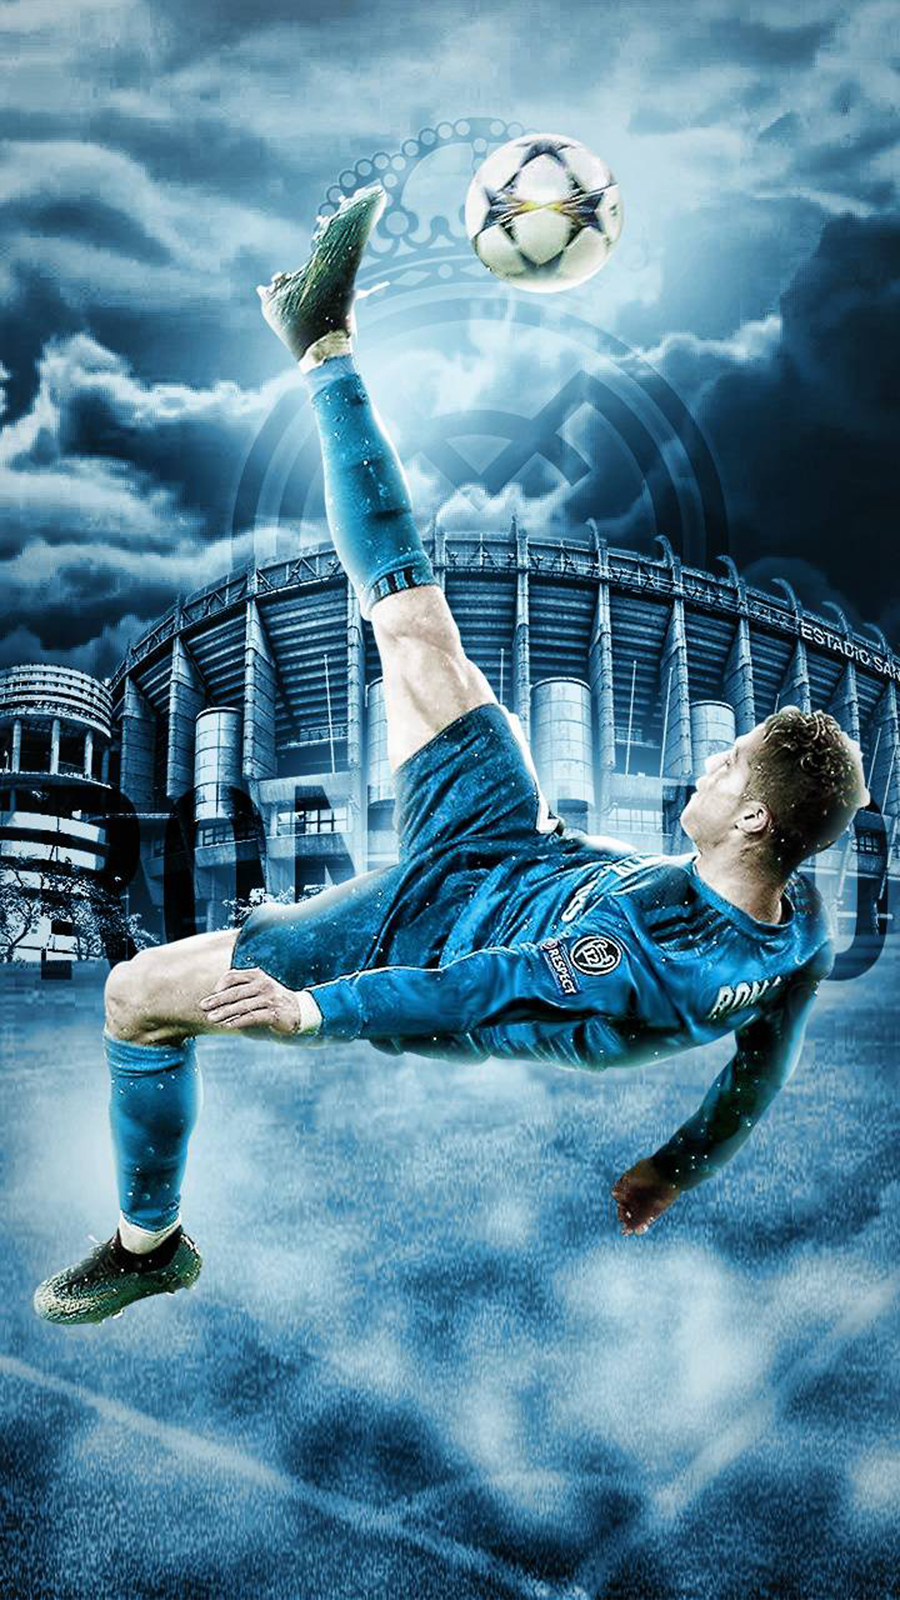 Ronaldo Football Wallpaper Free Download For Your Device